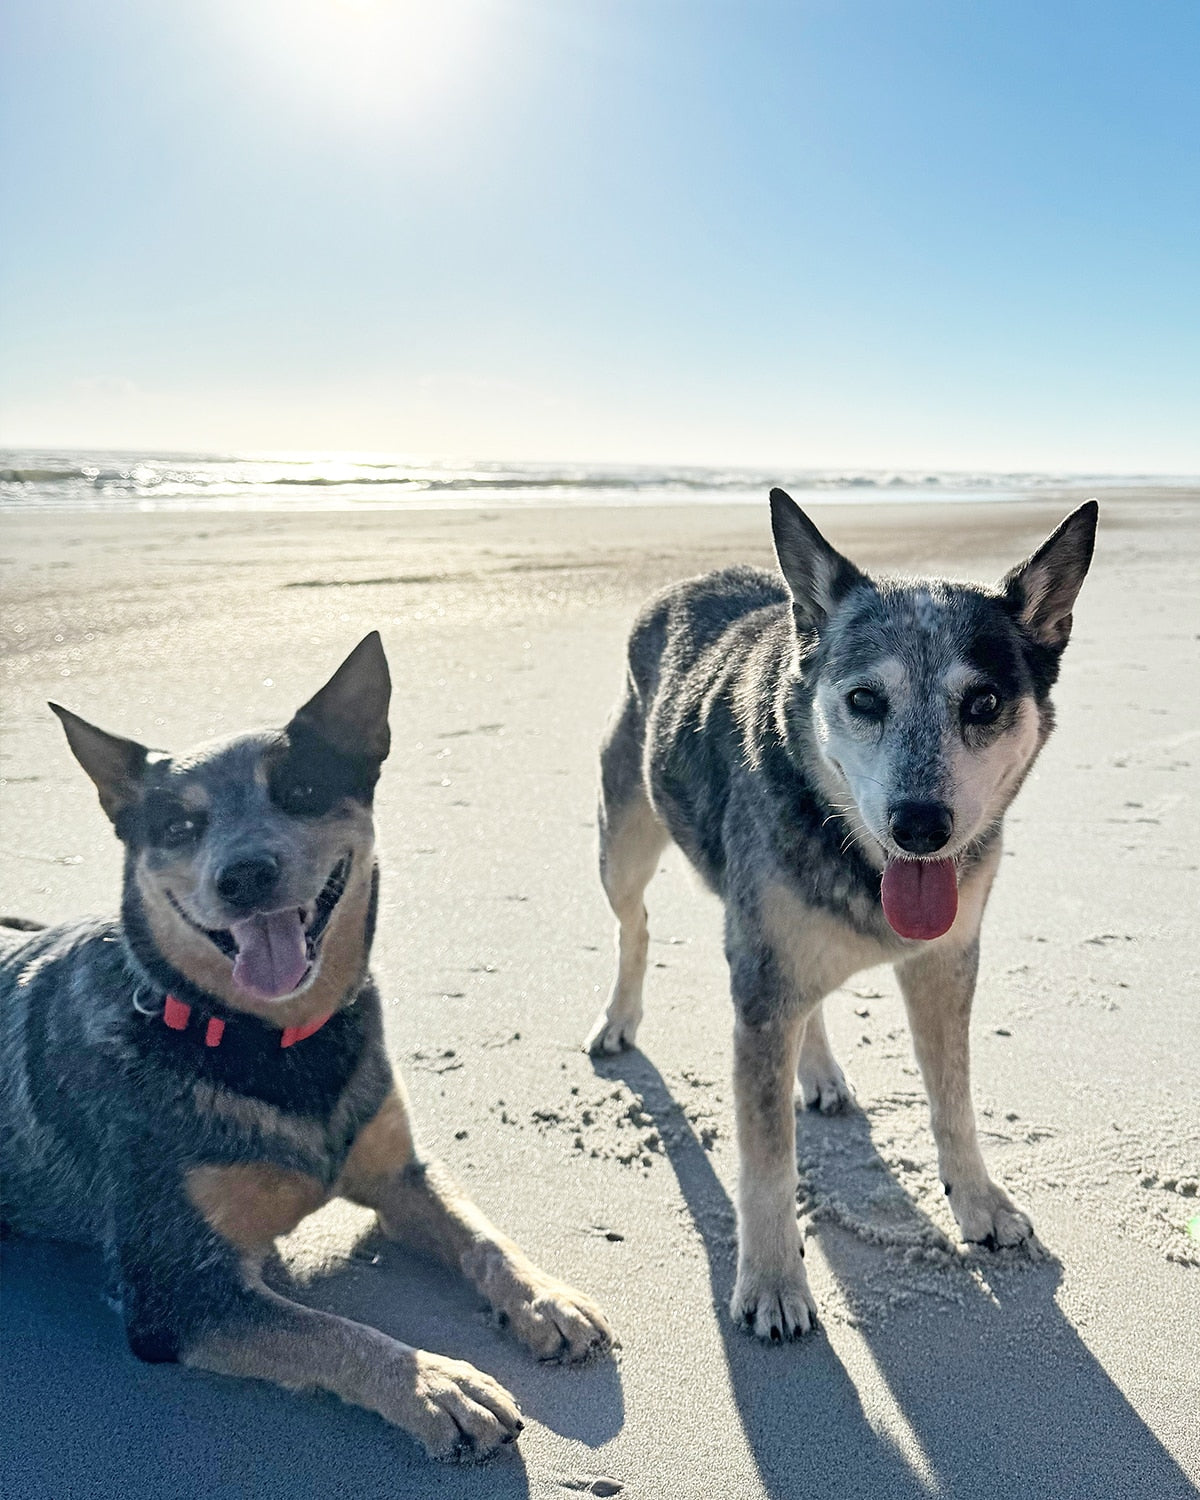 Two dogs at the beach in the sun